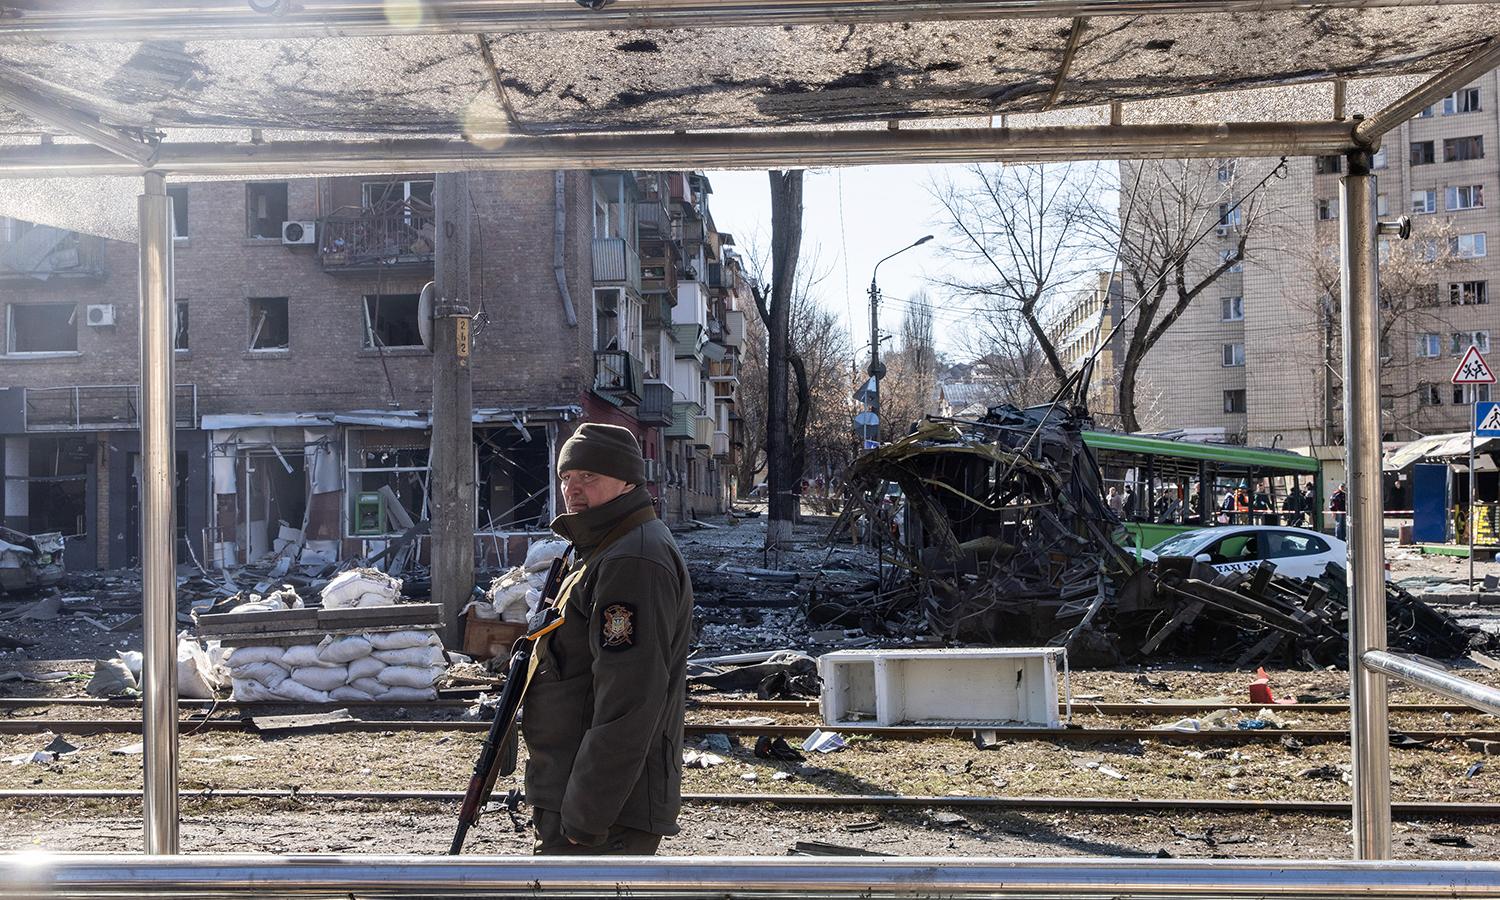 A member of the Ukrainian military stands amid debris from a damaged residential apartment block caused after a Russian rocket was shot down by Ukrainian air defenses on March 14, 2022, in Kyiv, Ukraine. (Photo by Chris McGrath/Getty Images)